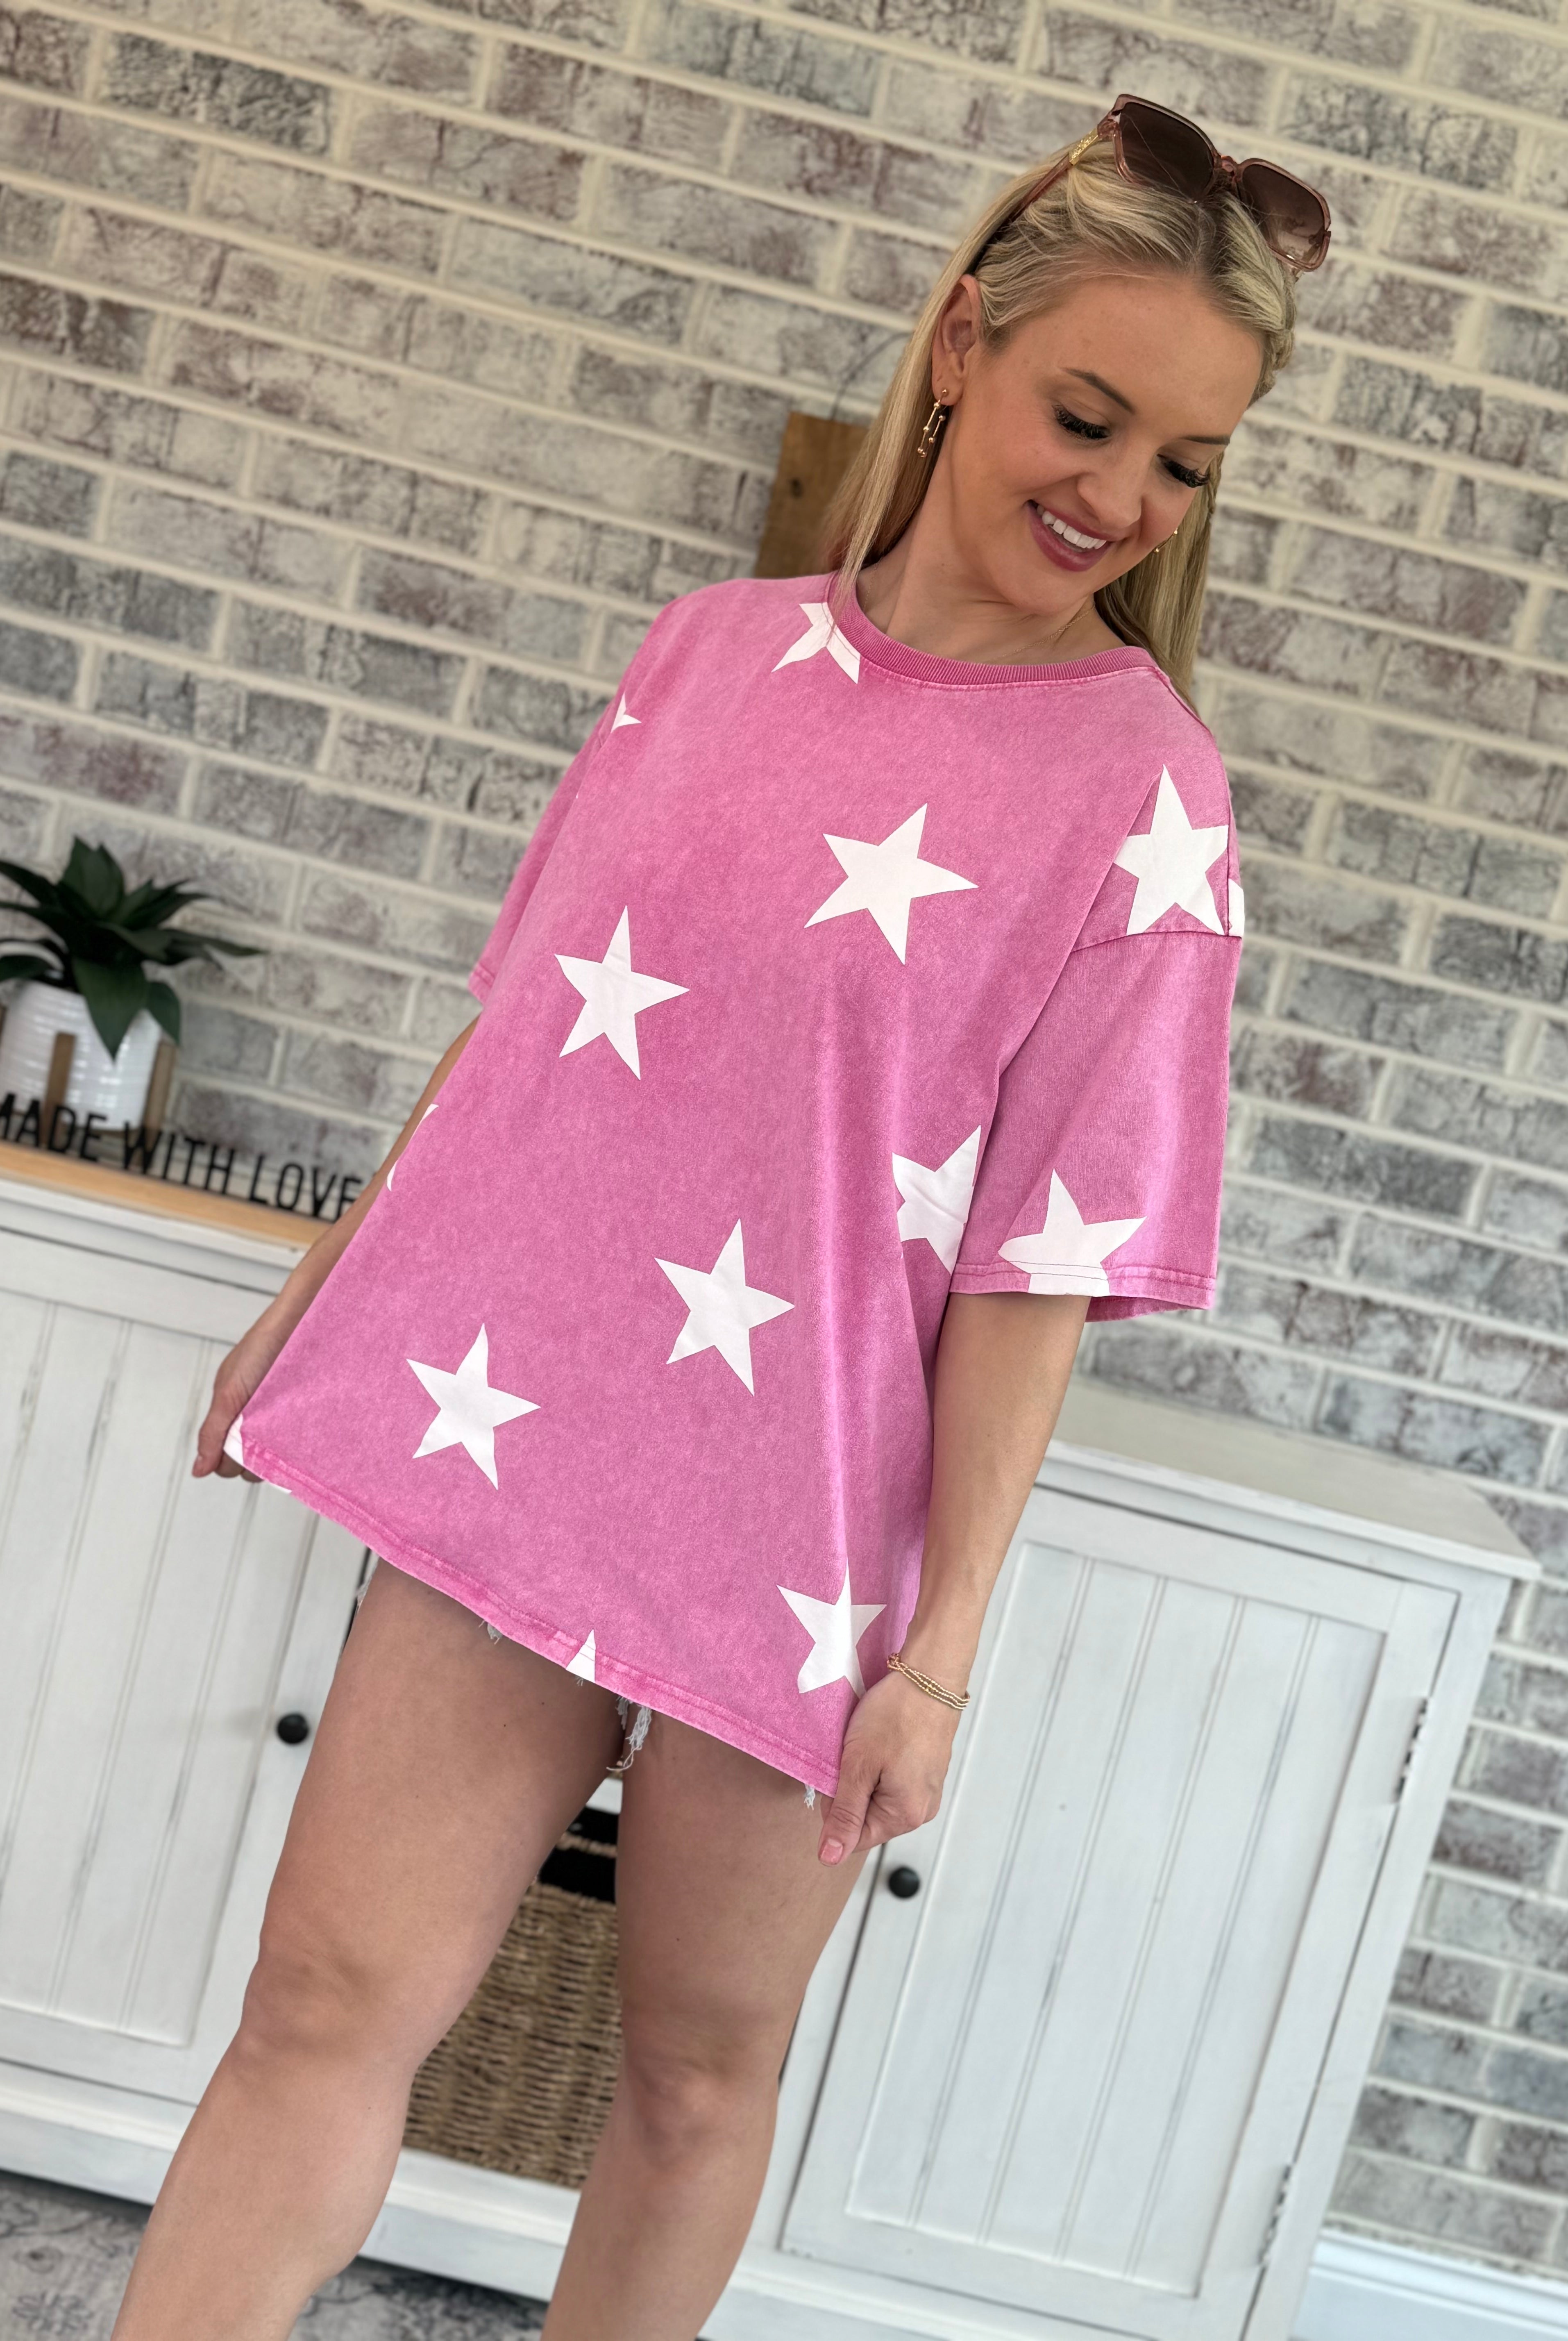 We See You Star Print Top-Tops-The Lovely Closet-The Lovely Closet, Women's Fashion Boutique in Alexandria, KY